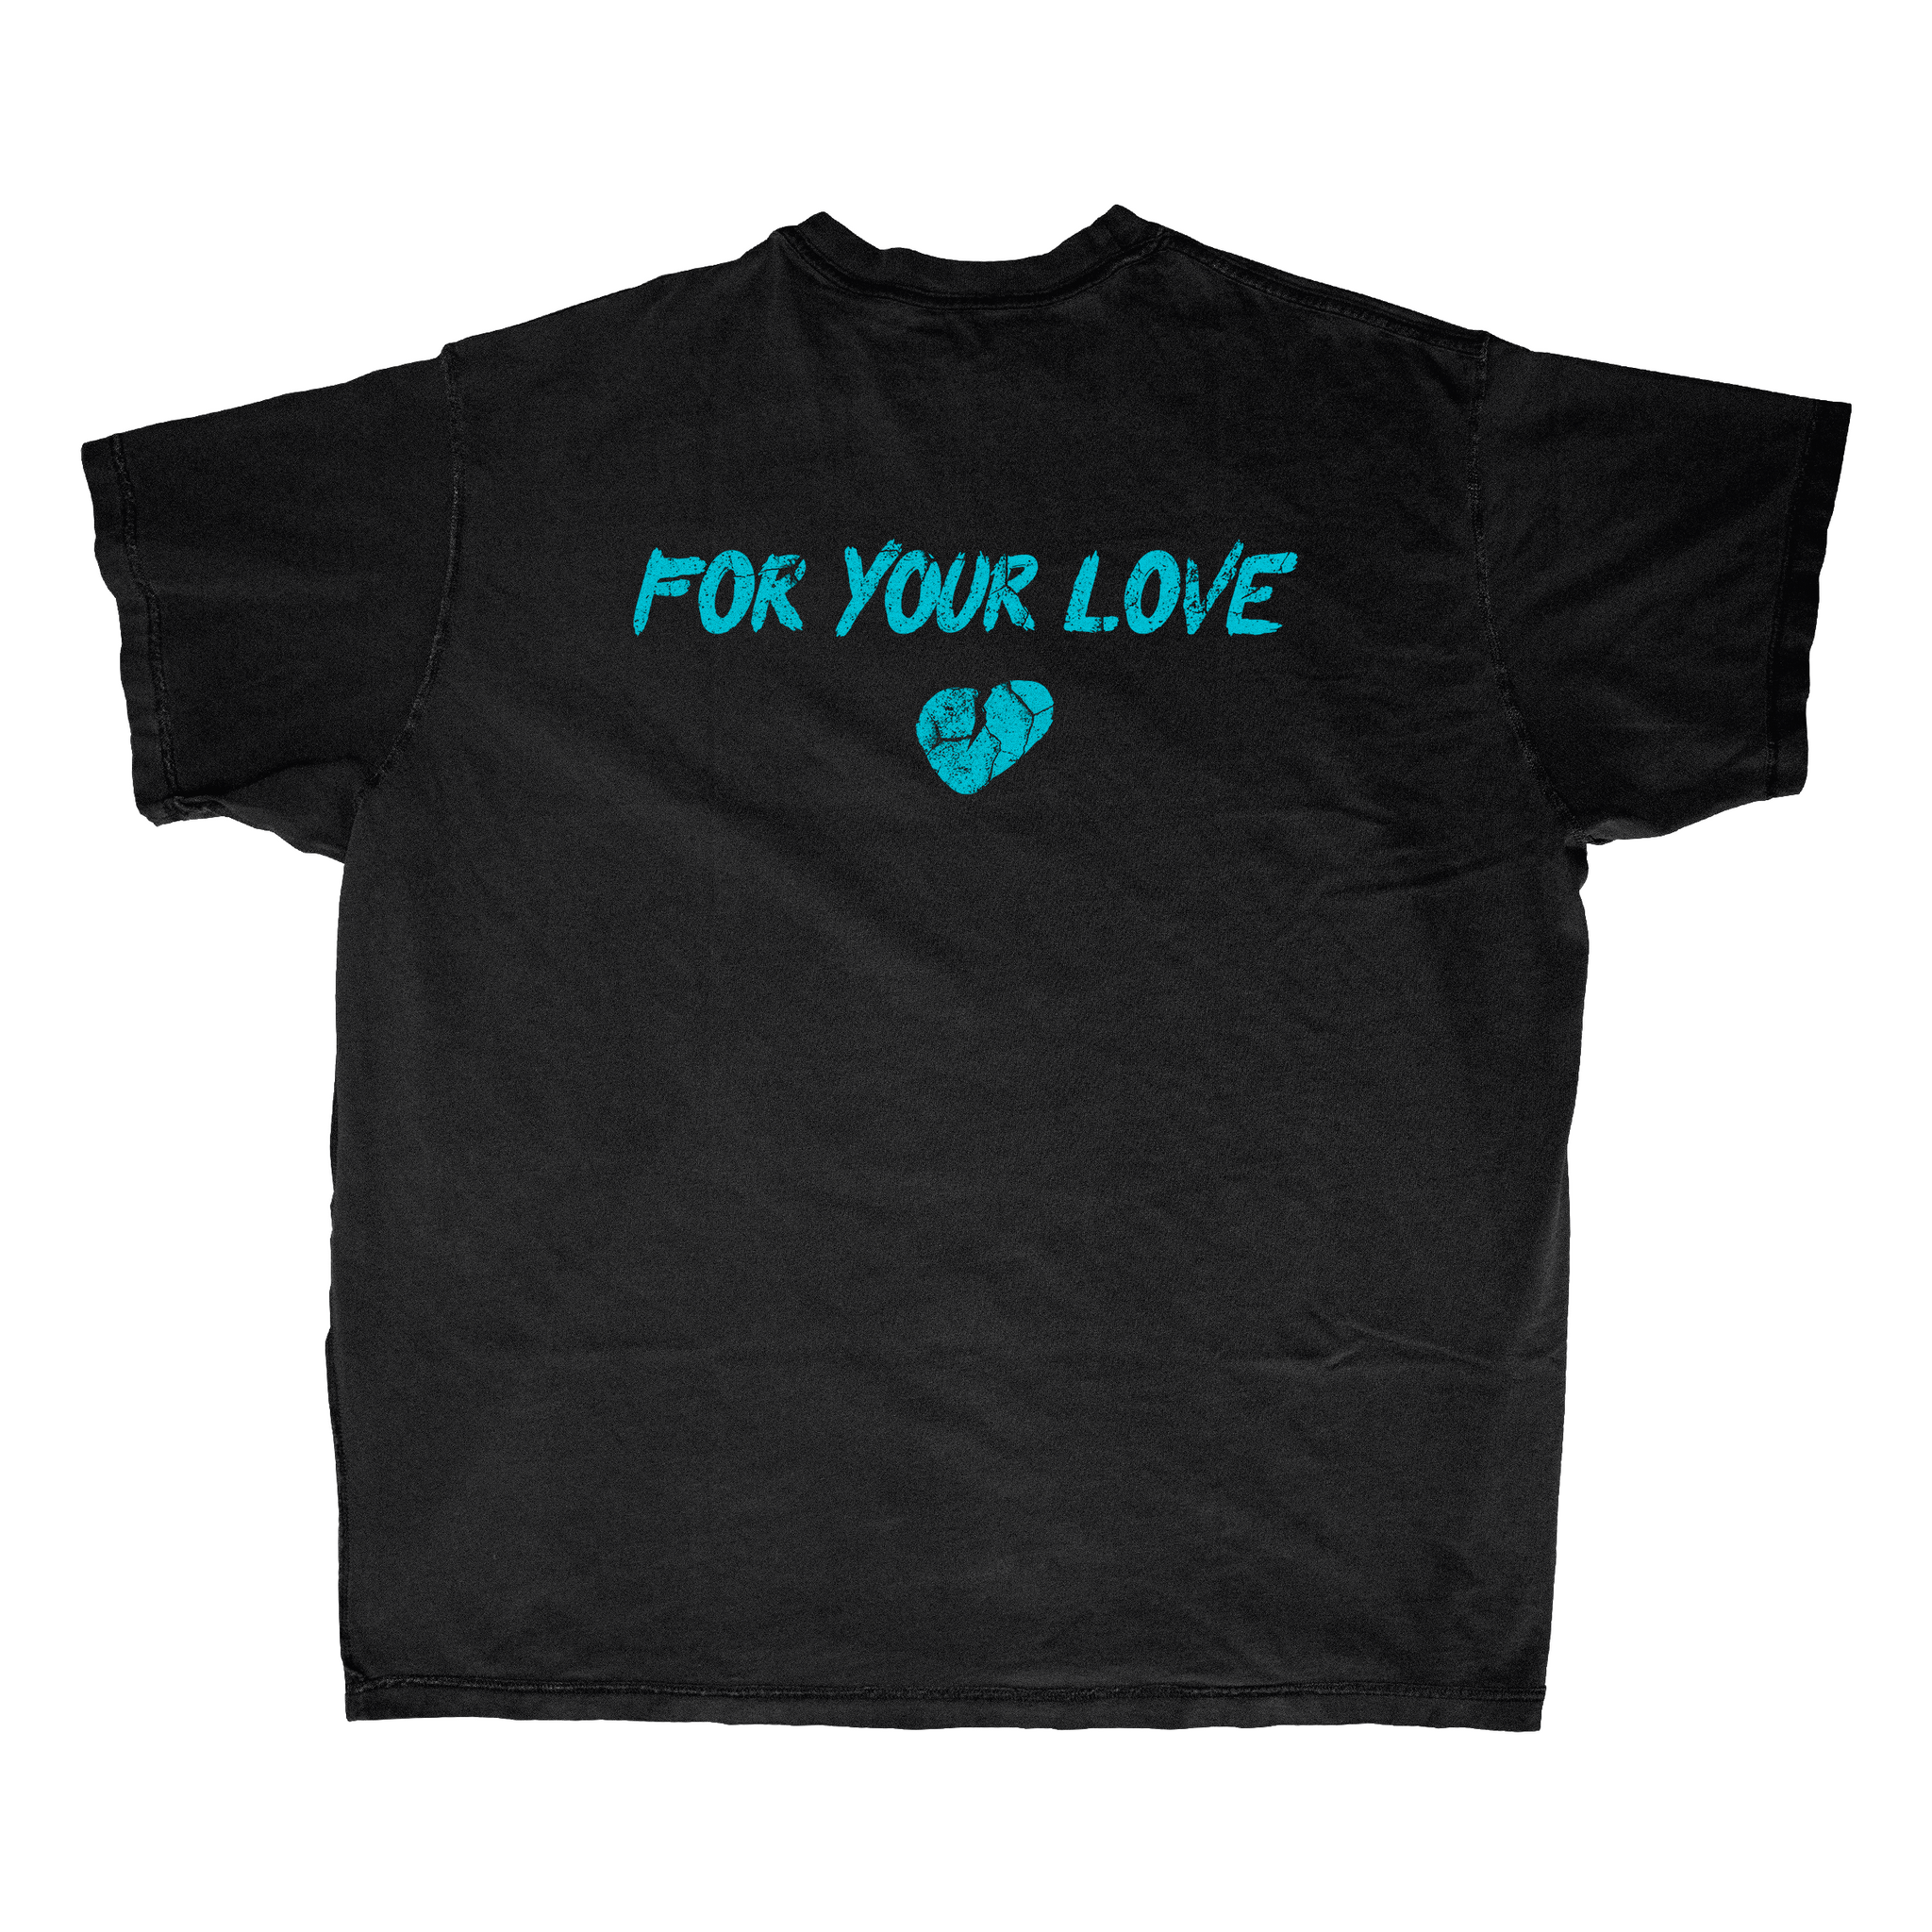 "For Your Love" Tee